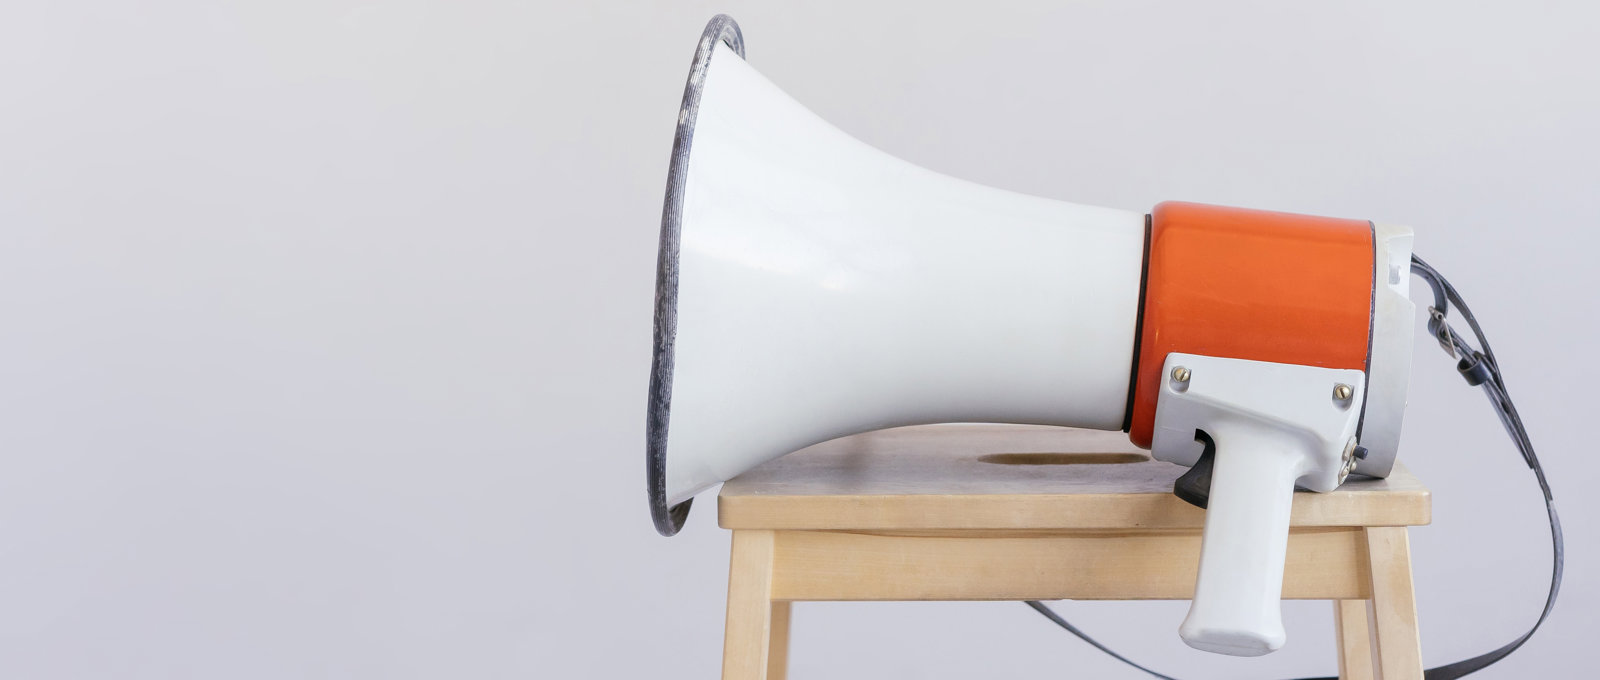 Photograph of a megaphone sitting on a stool